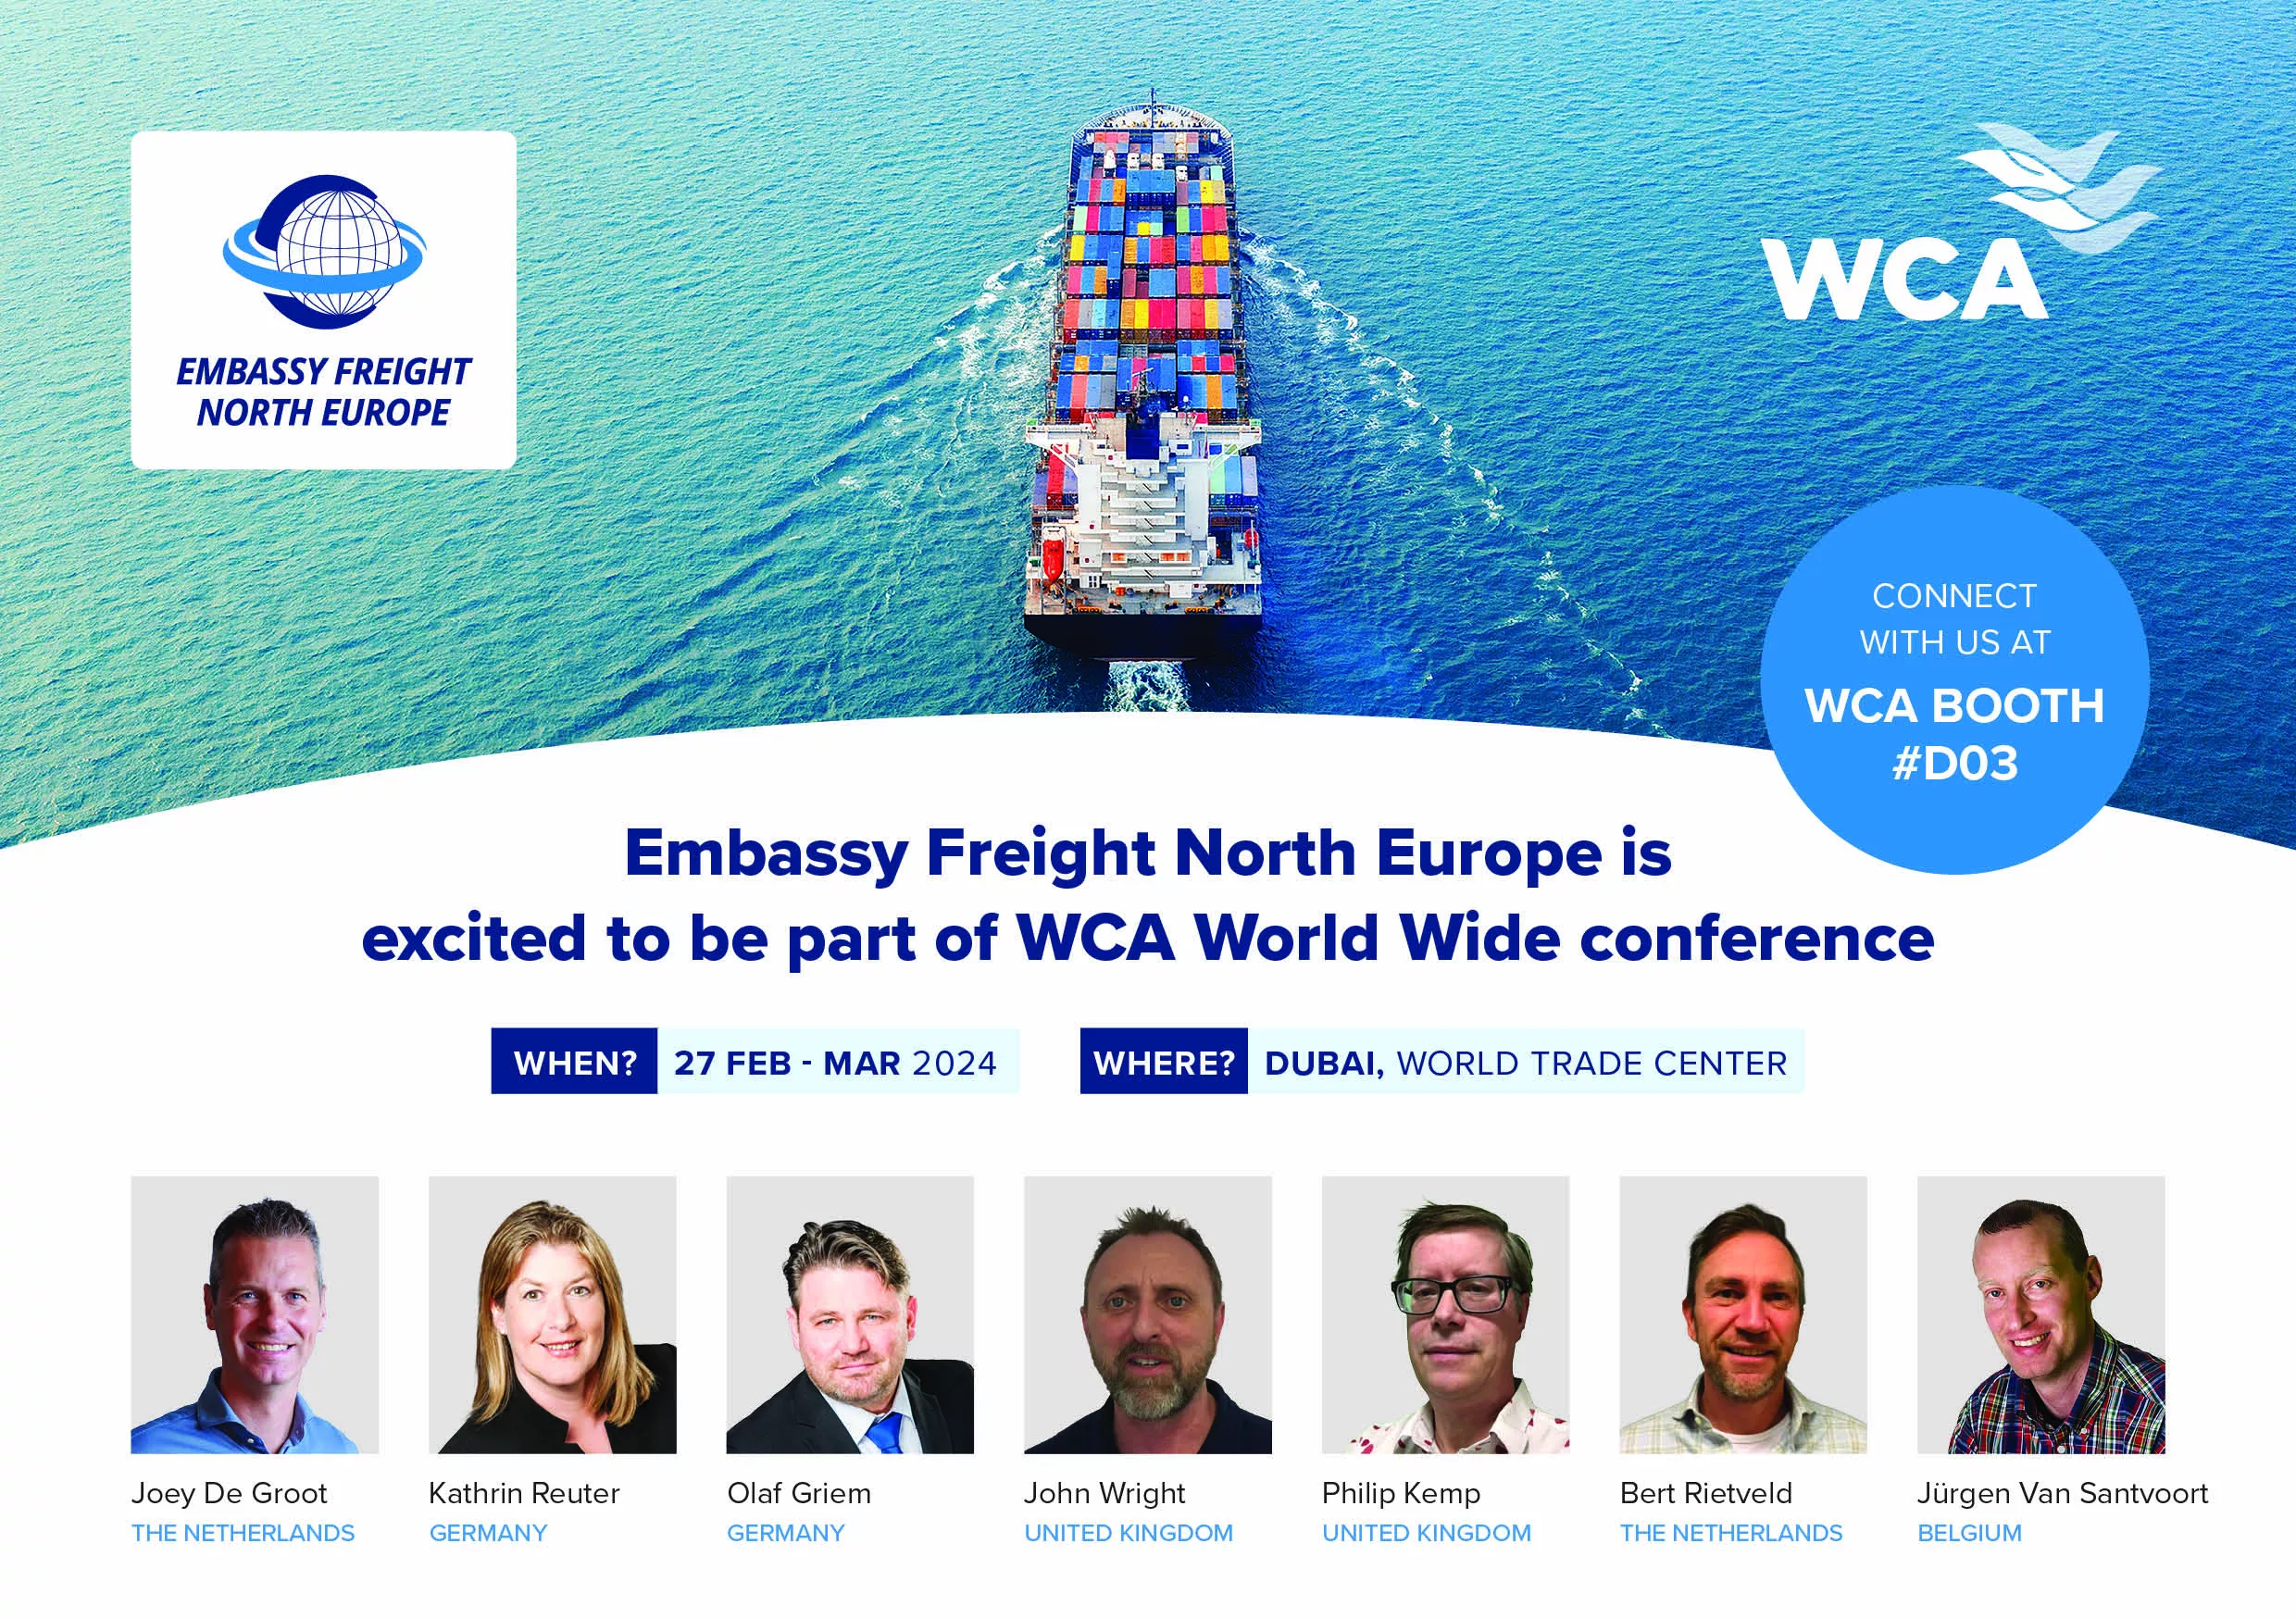 Our team is making their final preparations to depart to Dubai. We hope to meet you at WCAworldwide Conference on 27th Feb-2nd March. We are looking forward to see existing partners and friends and build new relationships. Five North European countries but one company/team.